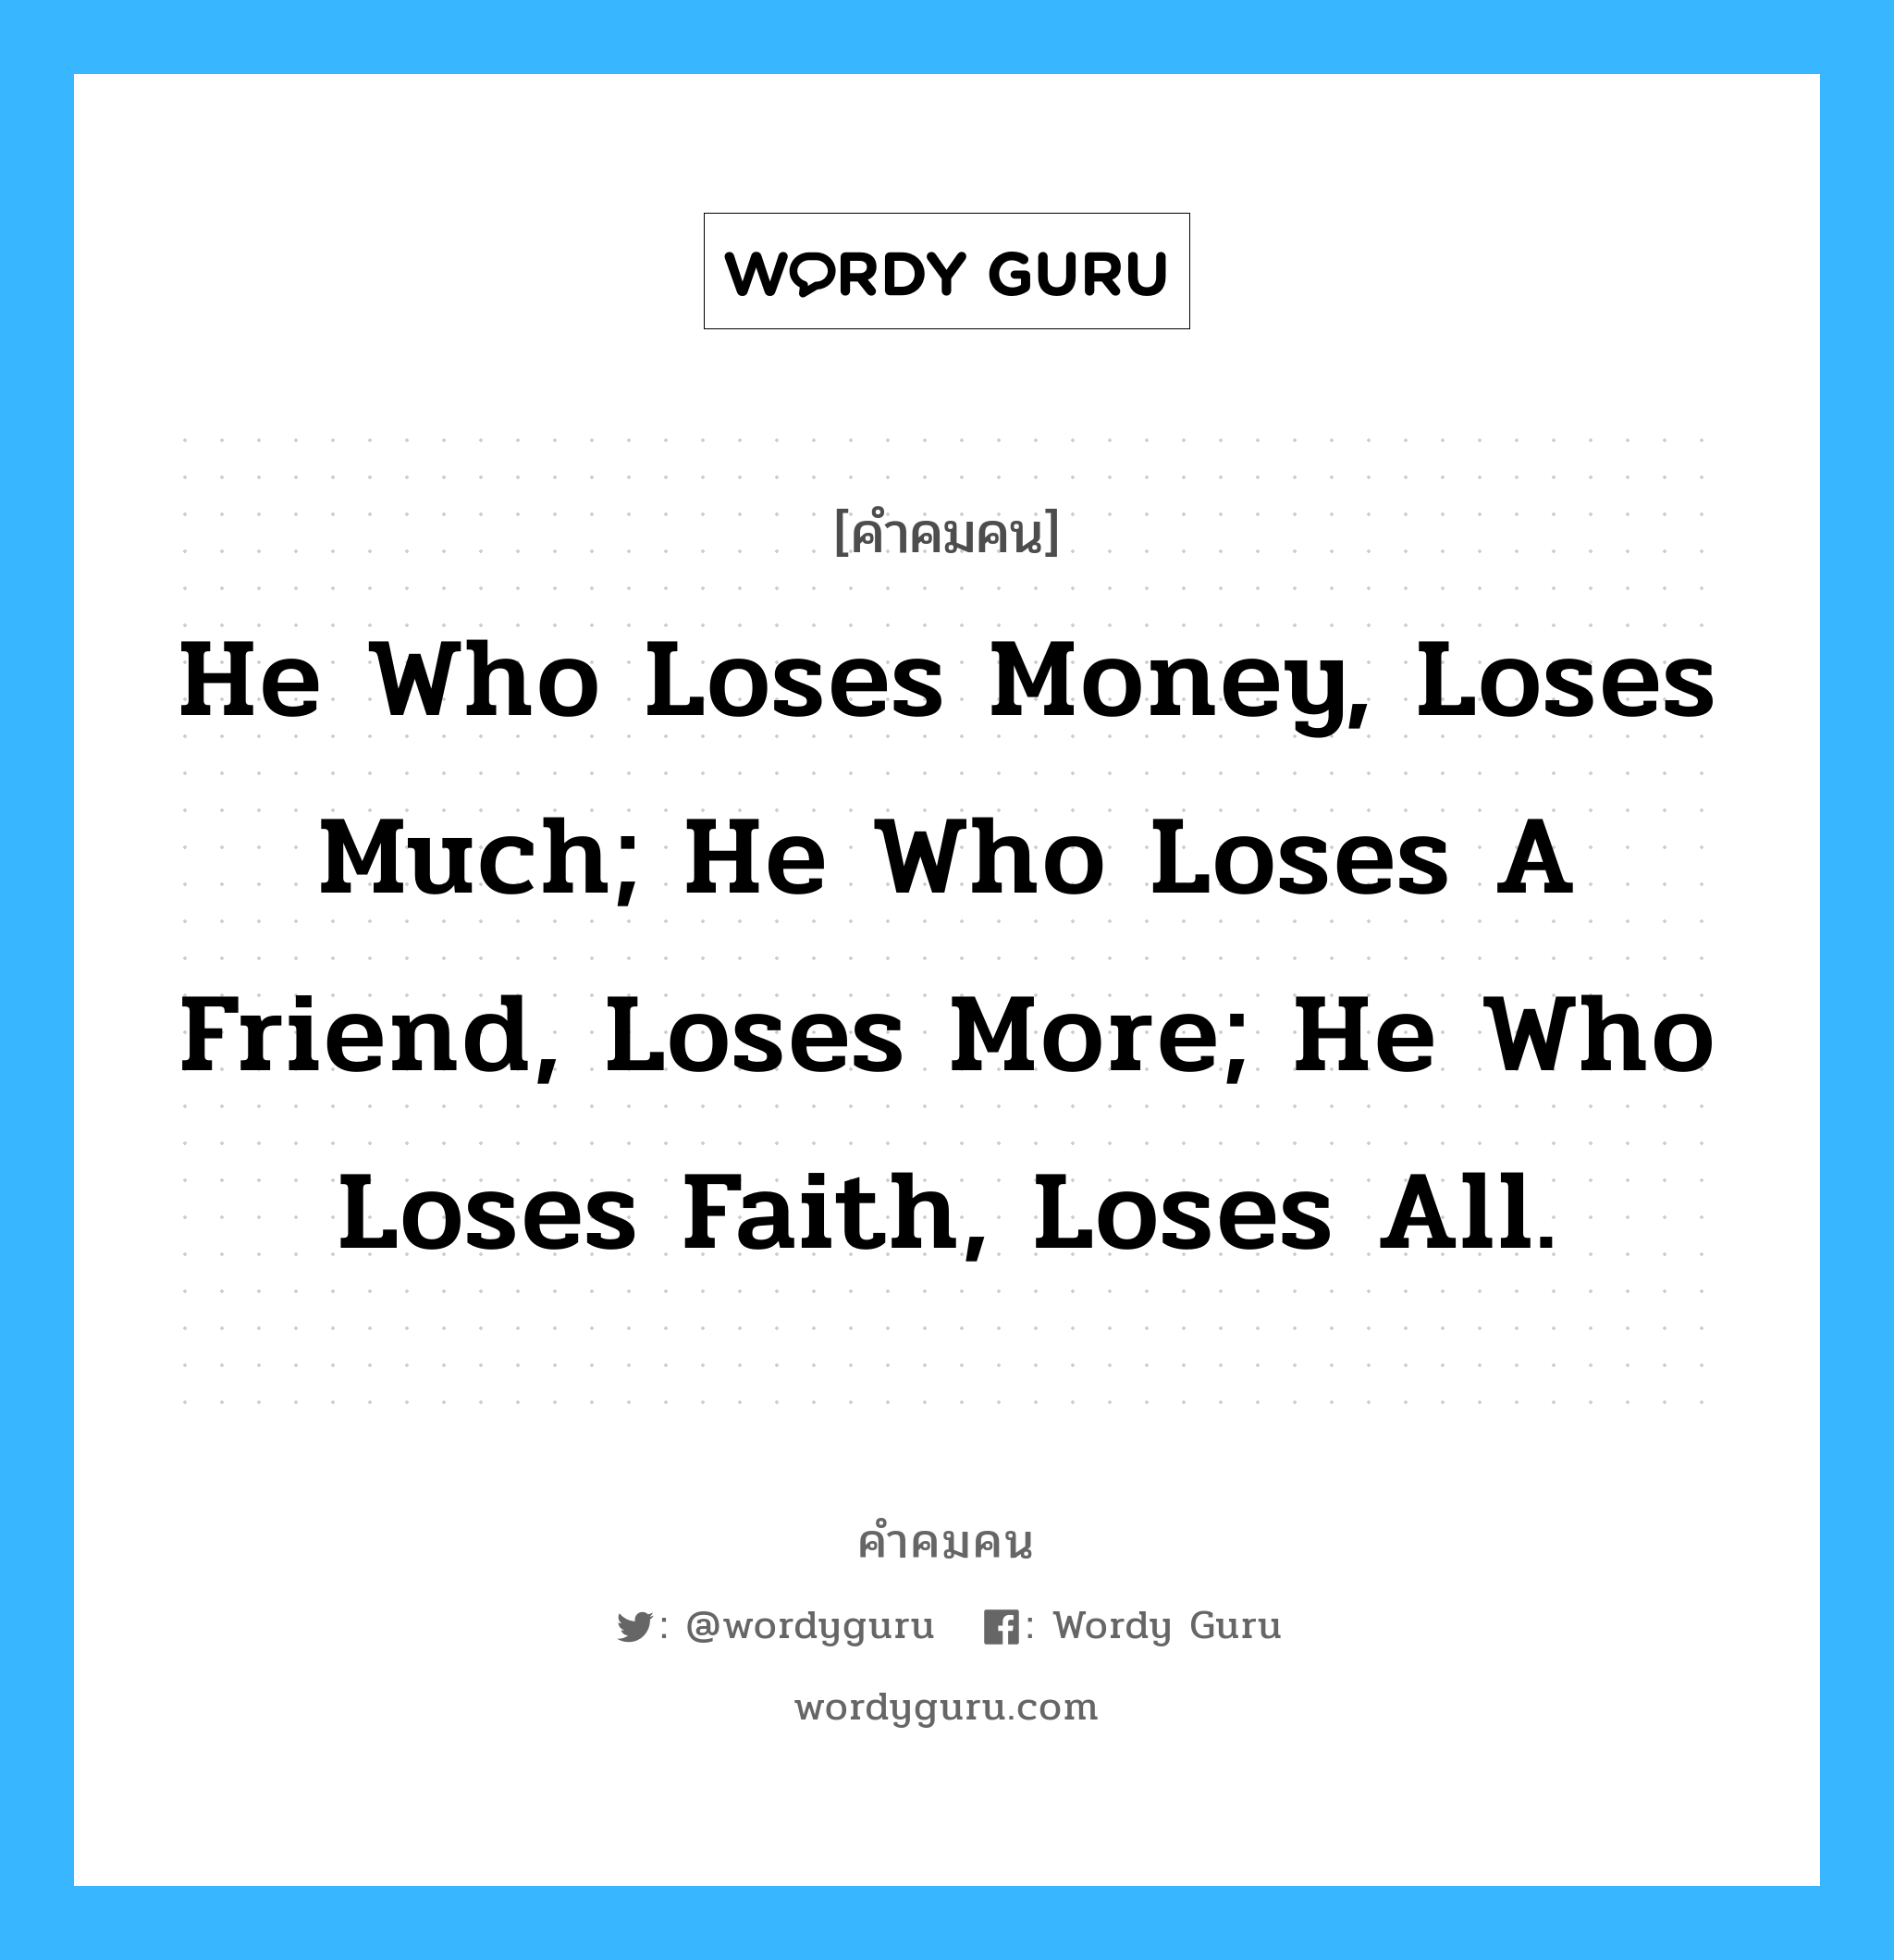 He who loses money, loses much; He who loses a friend, loses more; He who loses faith, loses all., คำคมคน He who loses money, loses much; He who loses a friend, loses more; He who loses faith, loses all. เขา..ผู้สูญสิ้นทรัพย์สินไป เขา..สูญเสียมากเหลือเกิน เขา..ผู้สูญสิ้นเพื่อนไป เขา..สูญเสียมากกว่า เขา..ผู้สูญสิ้นความศรัทธา เขา..ผู้นั้น.. สูญเสียยิ่งกว่าใคร ๆ Anonymous หมวด Anonymous